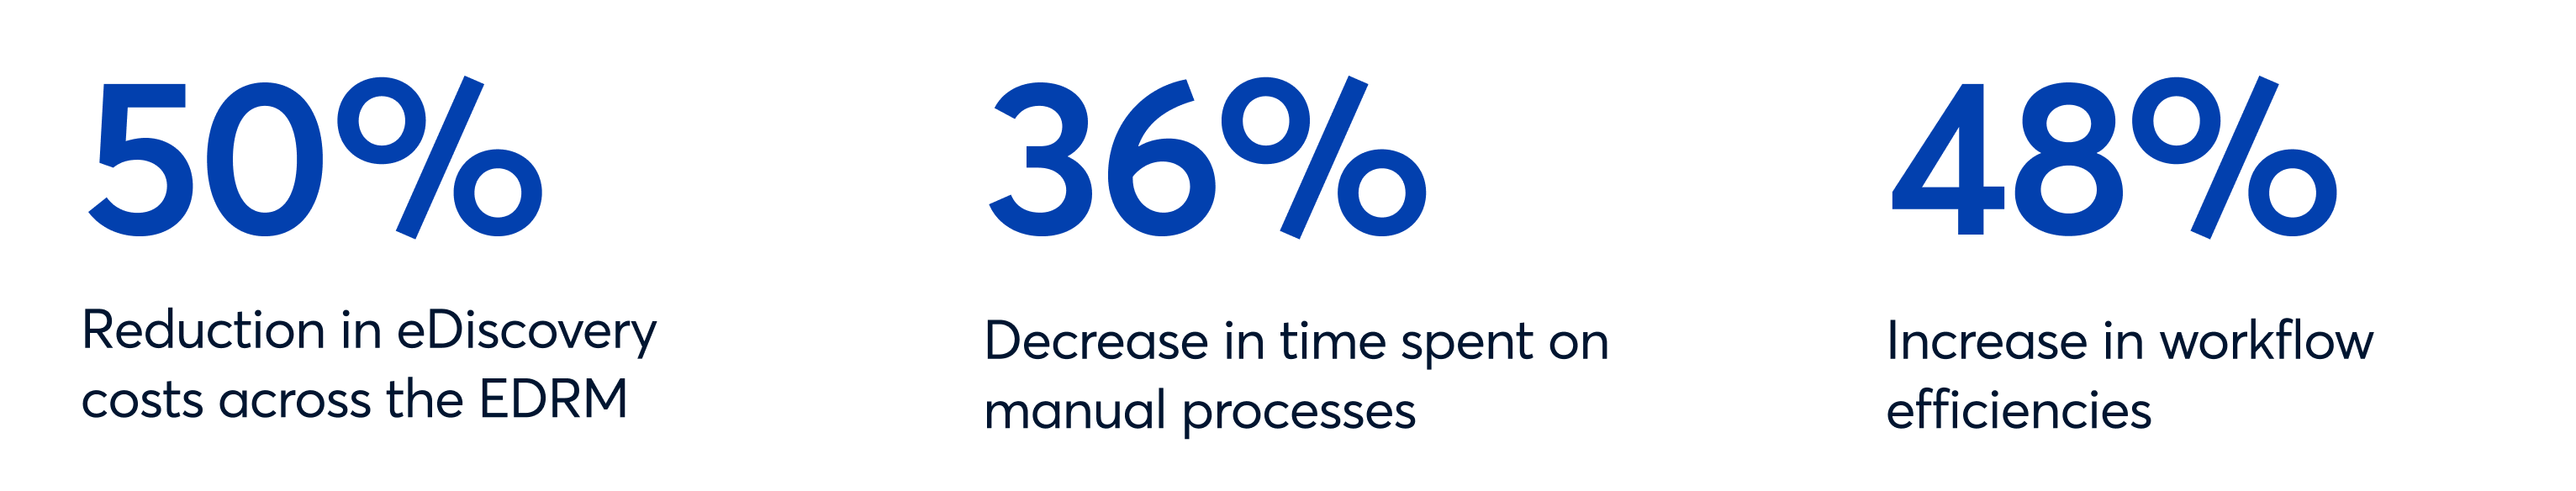 Three results shown: 50% less eDiscovery costs, 36% less time on manual tasks, 48% more workflow efficiency.